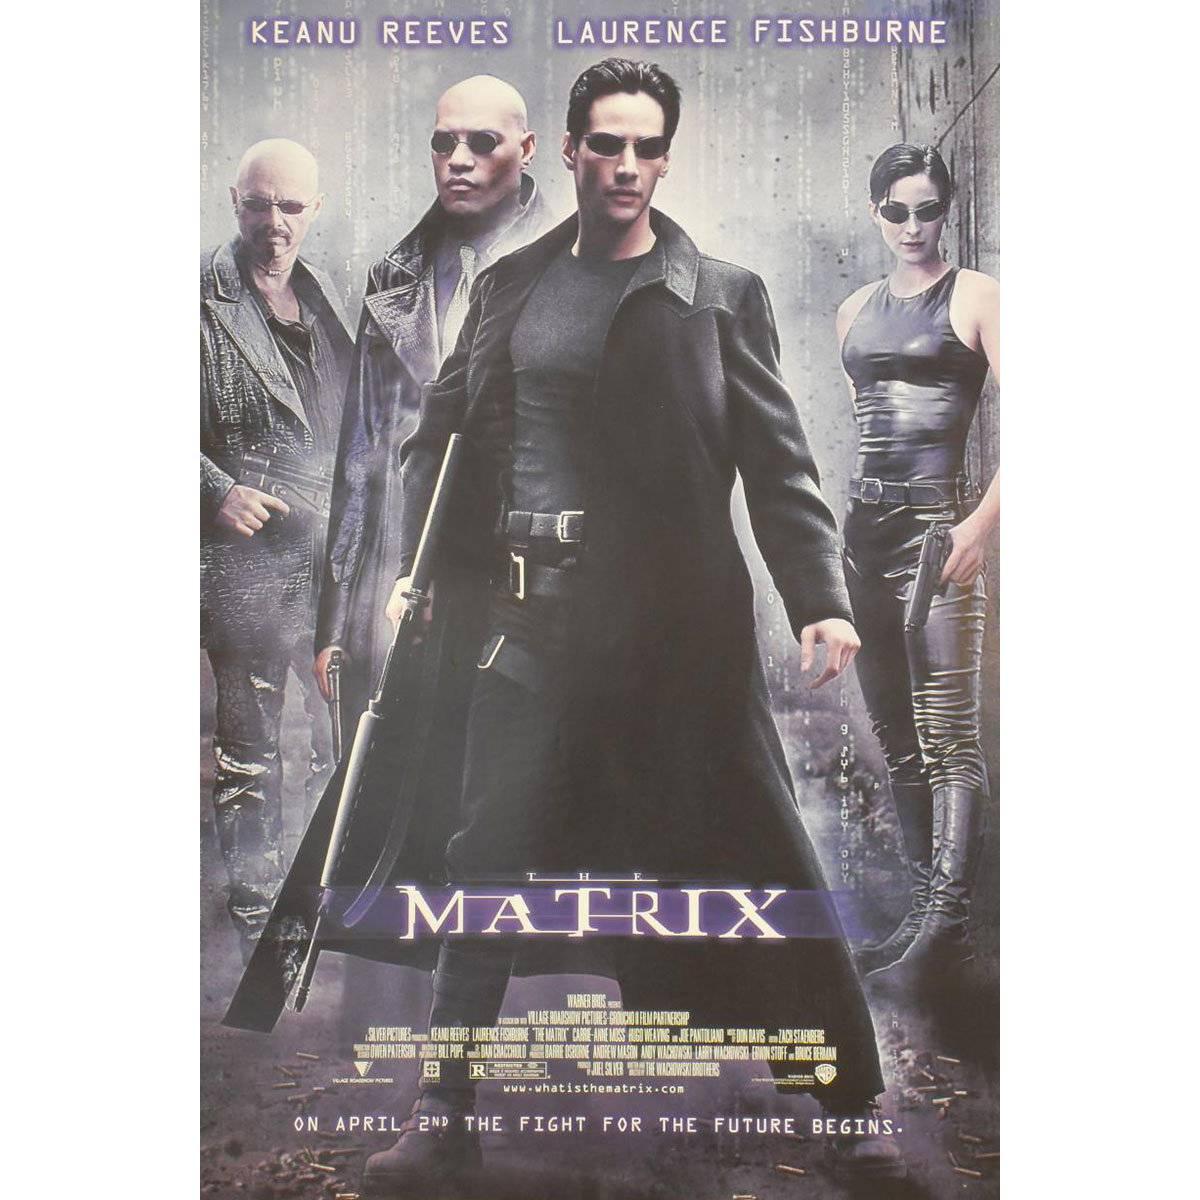 "The Matrix" Film Posters, 1999 For Sale